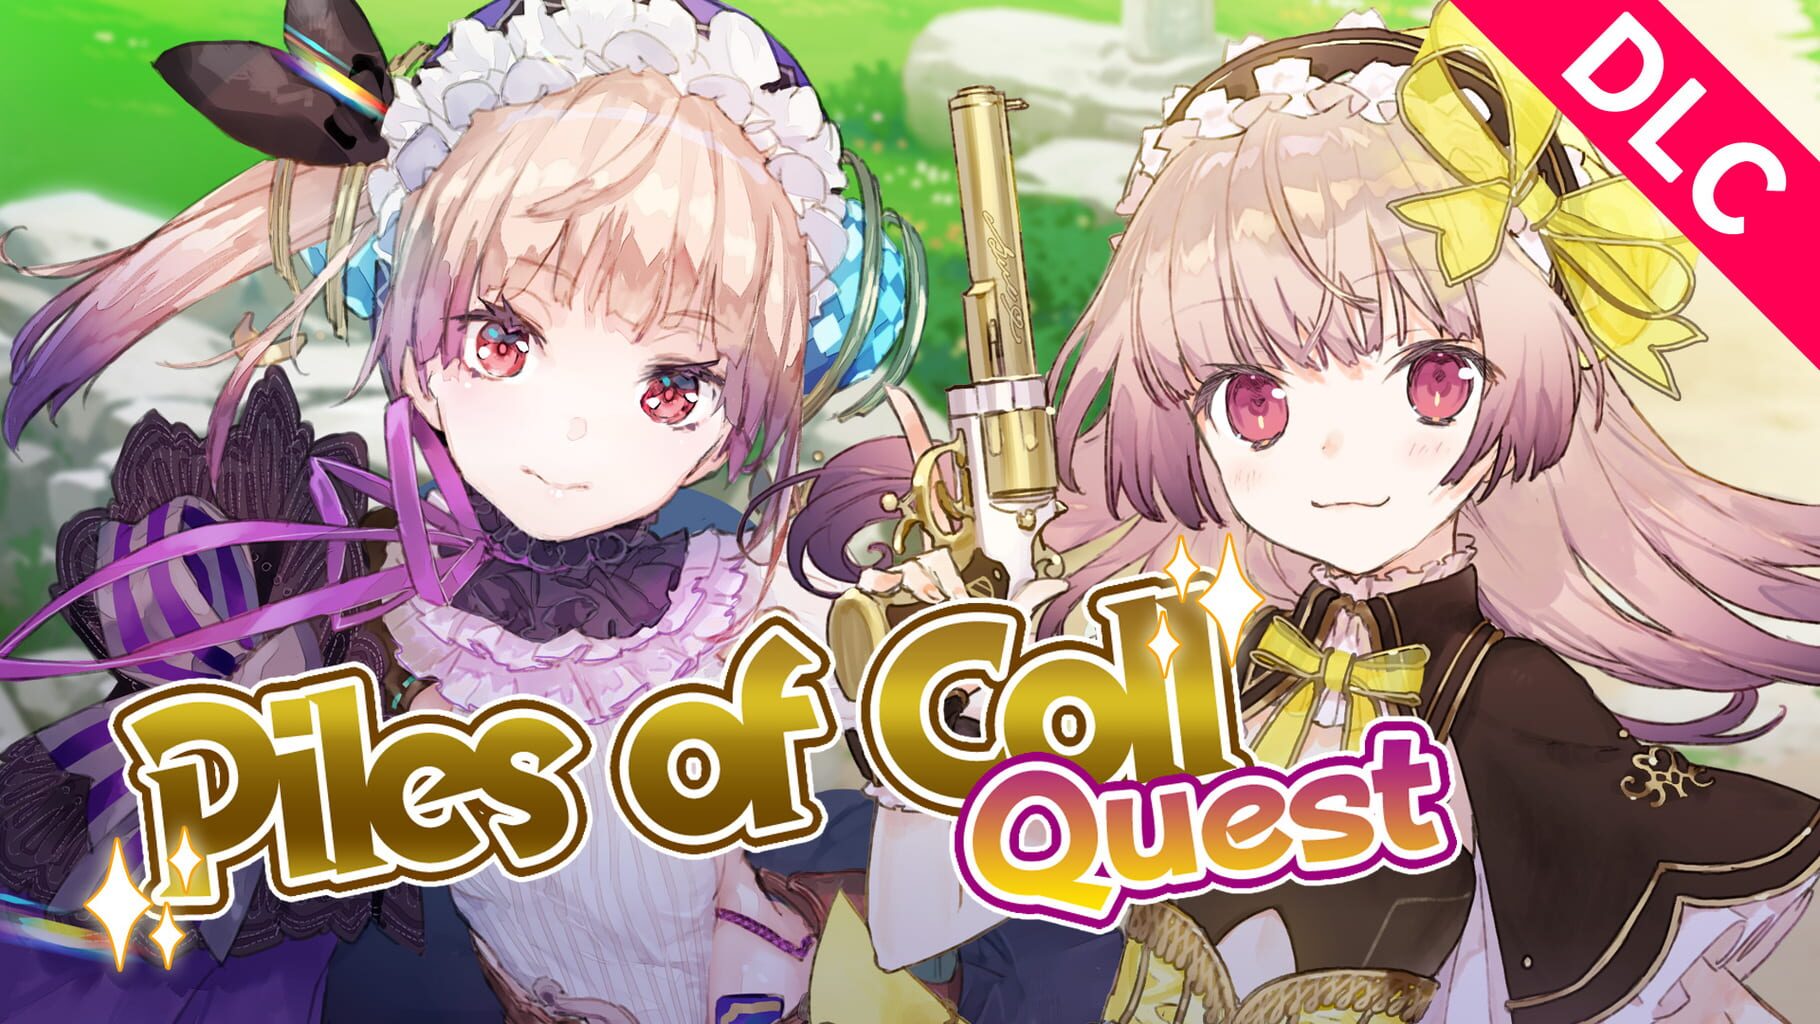 Atelier Lydie & Suelle: The Alchemists and the Mysterious Paintings - New Quest: Piles of Coll Quest artwork